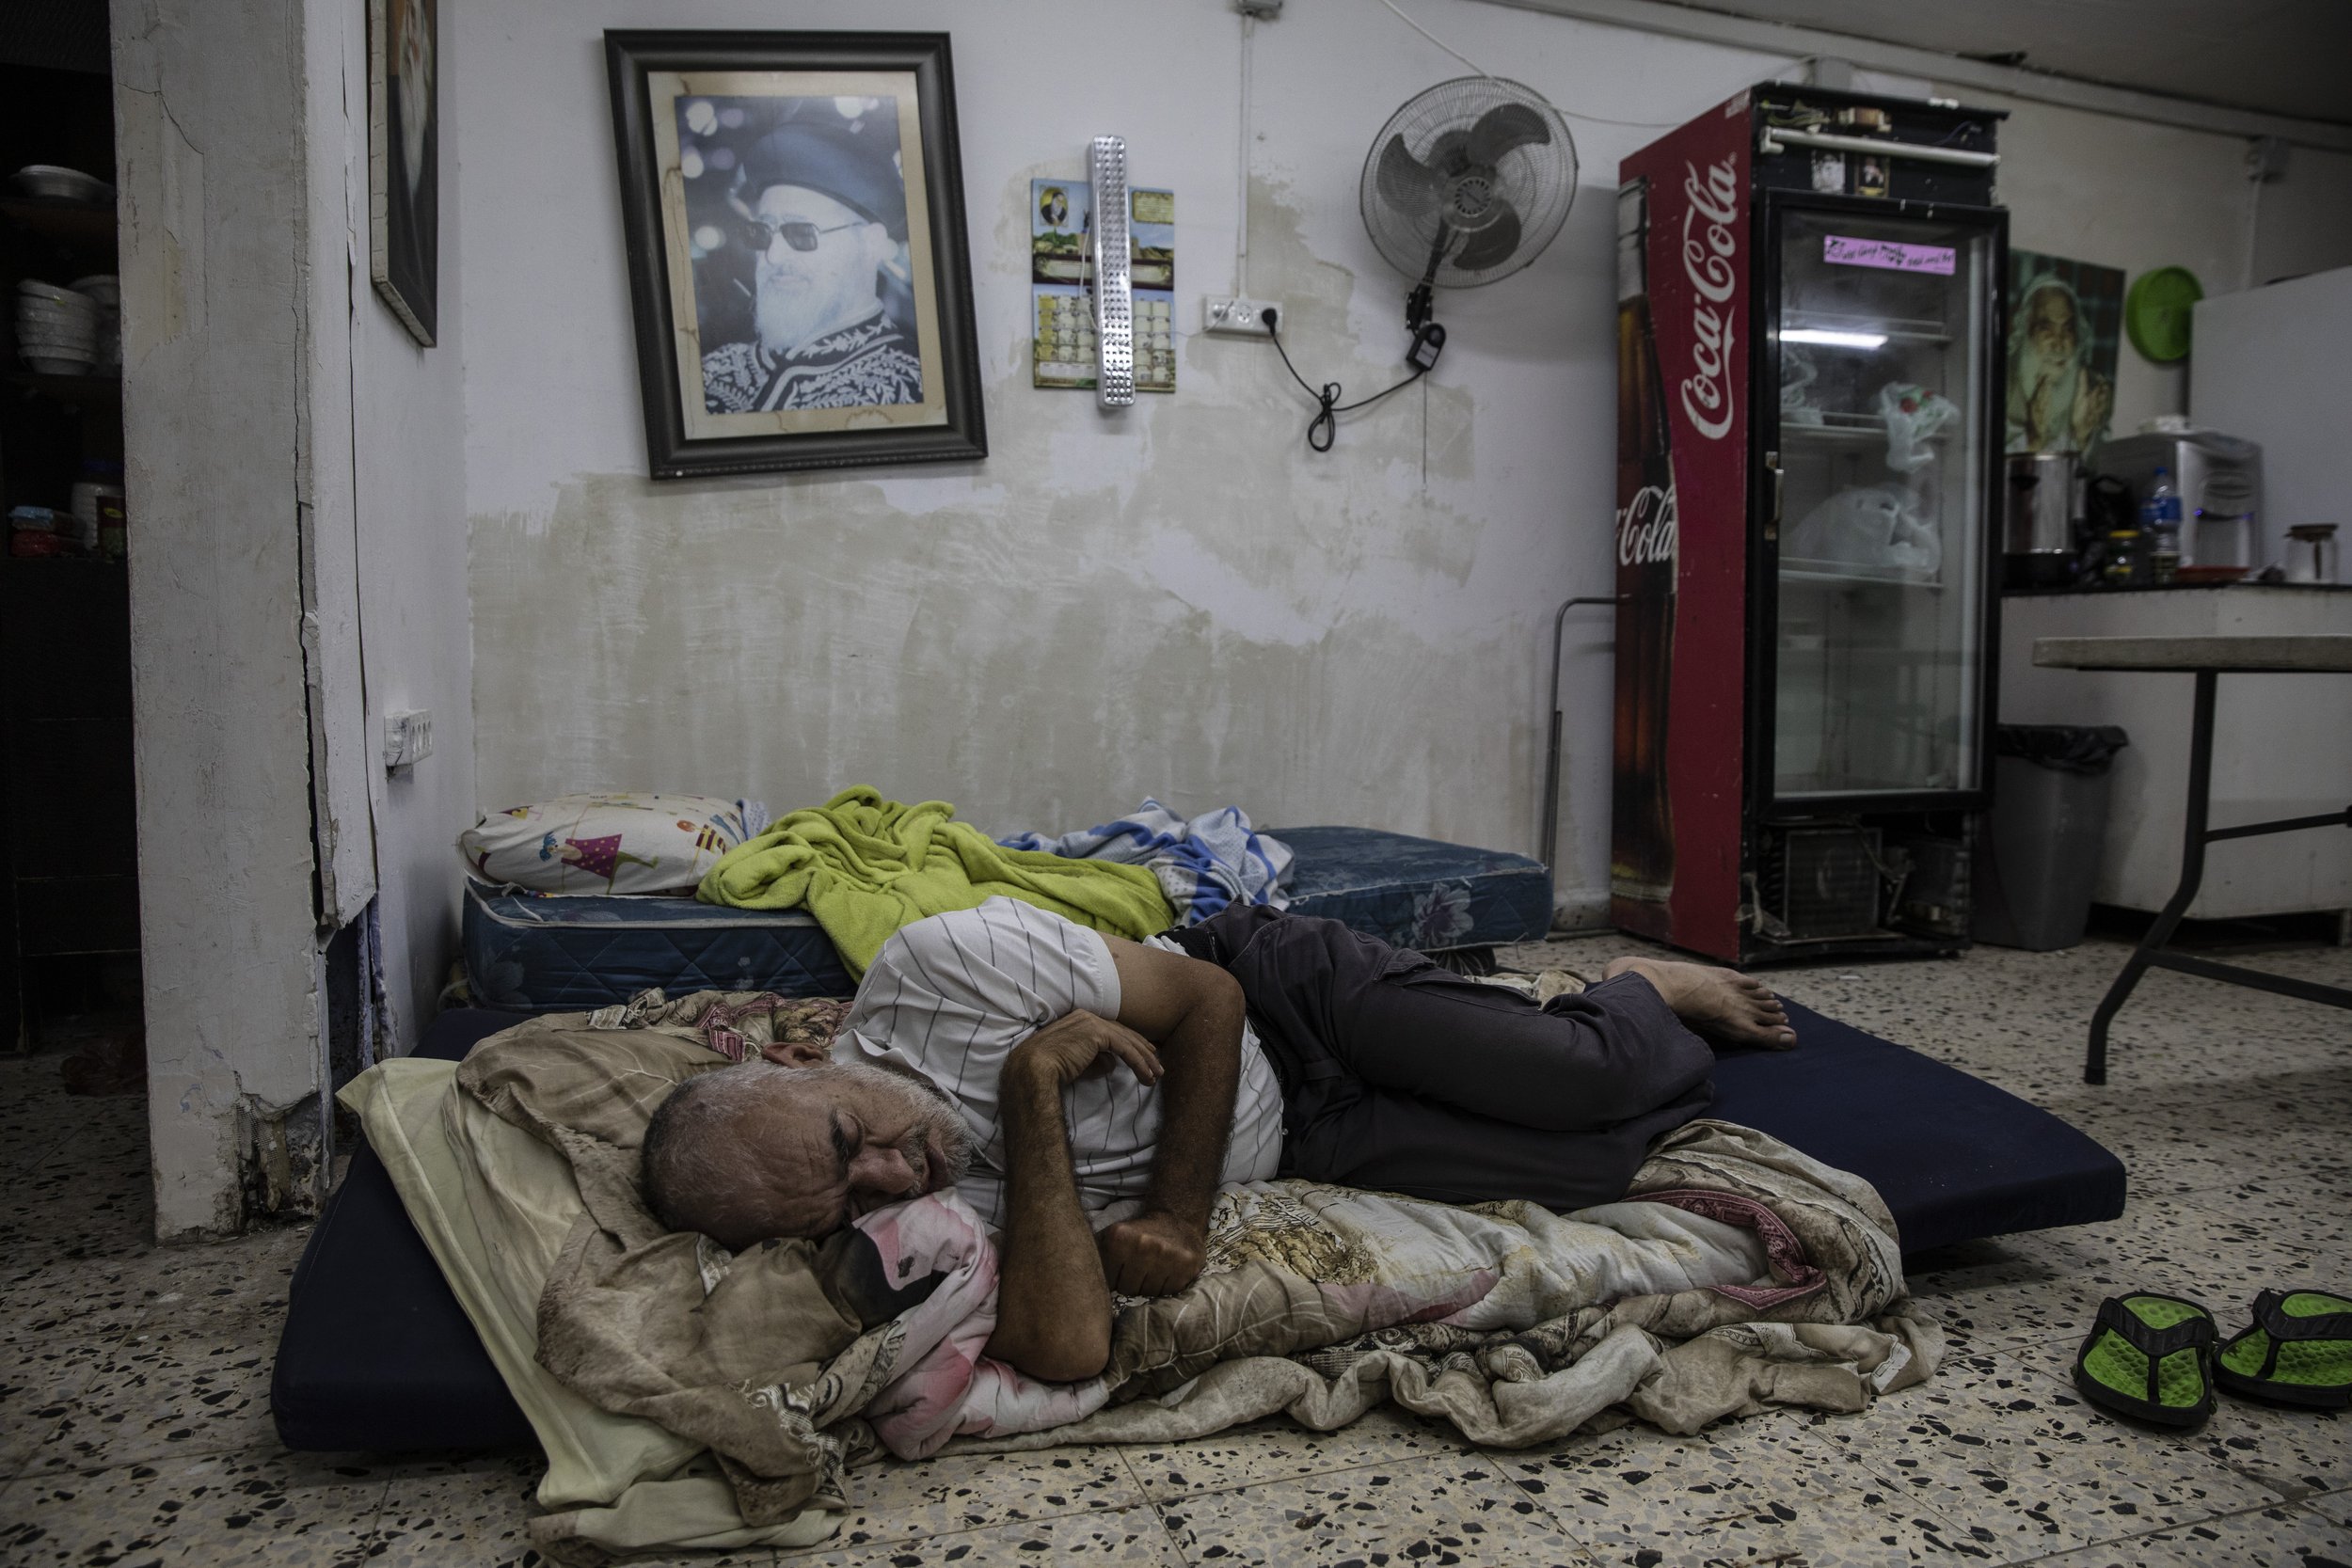  Daniel Turjman, 60, rests in a bomb shelter that is also used as a synagogue near his apartment building in Ashdod, Israel, on May 19, 2021, as fighting escalates between the Israeli military Hamas militants. (AP Photo/Heidi Levine) 